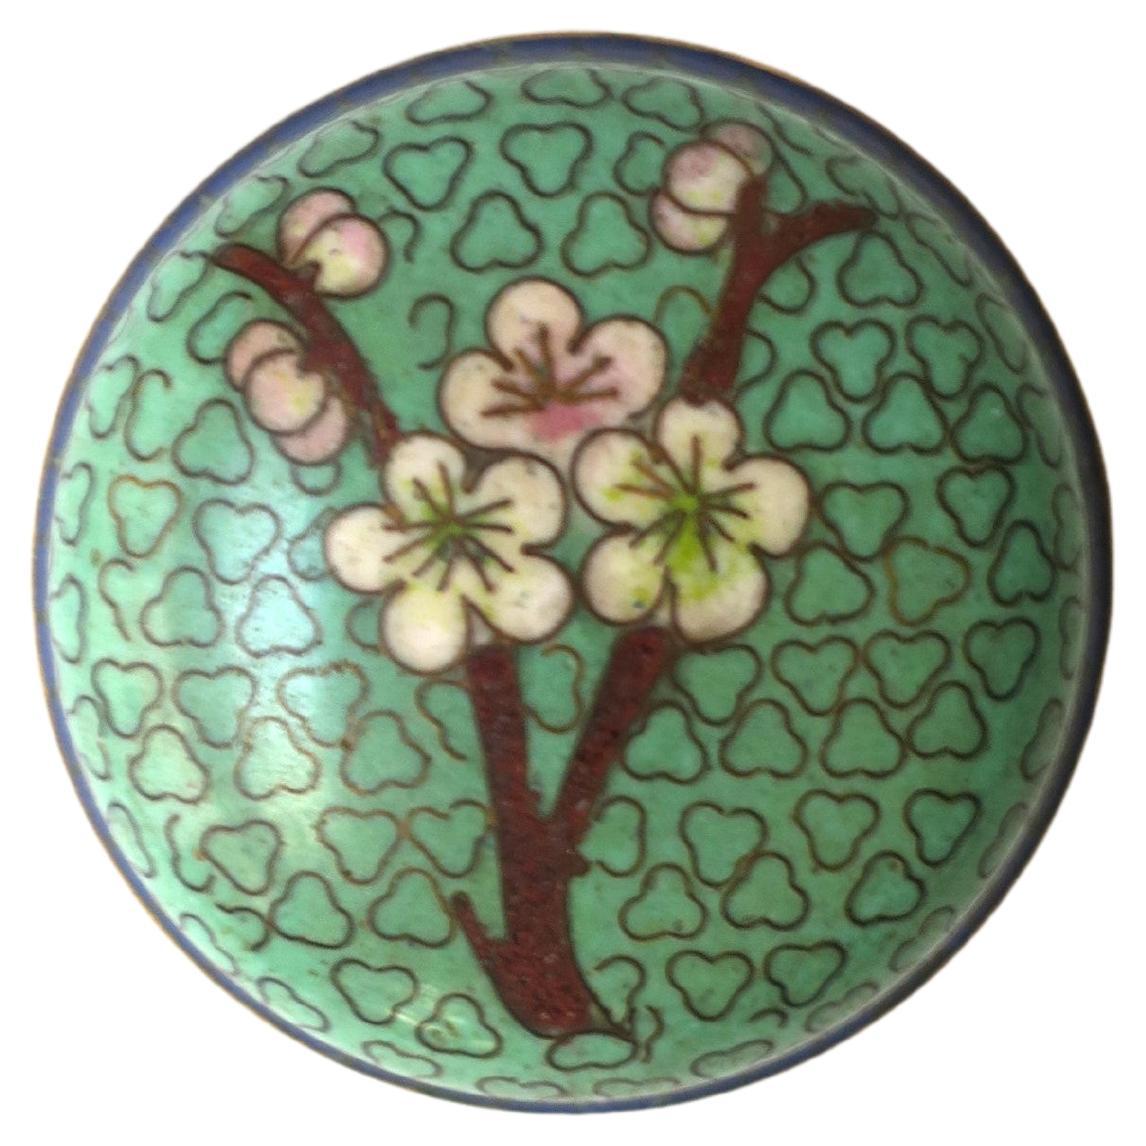 Cloisonne Enamel Box with Flowers Chinoiserie Style